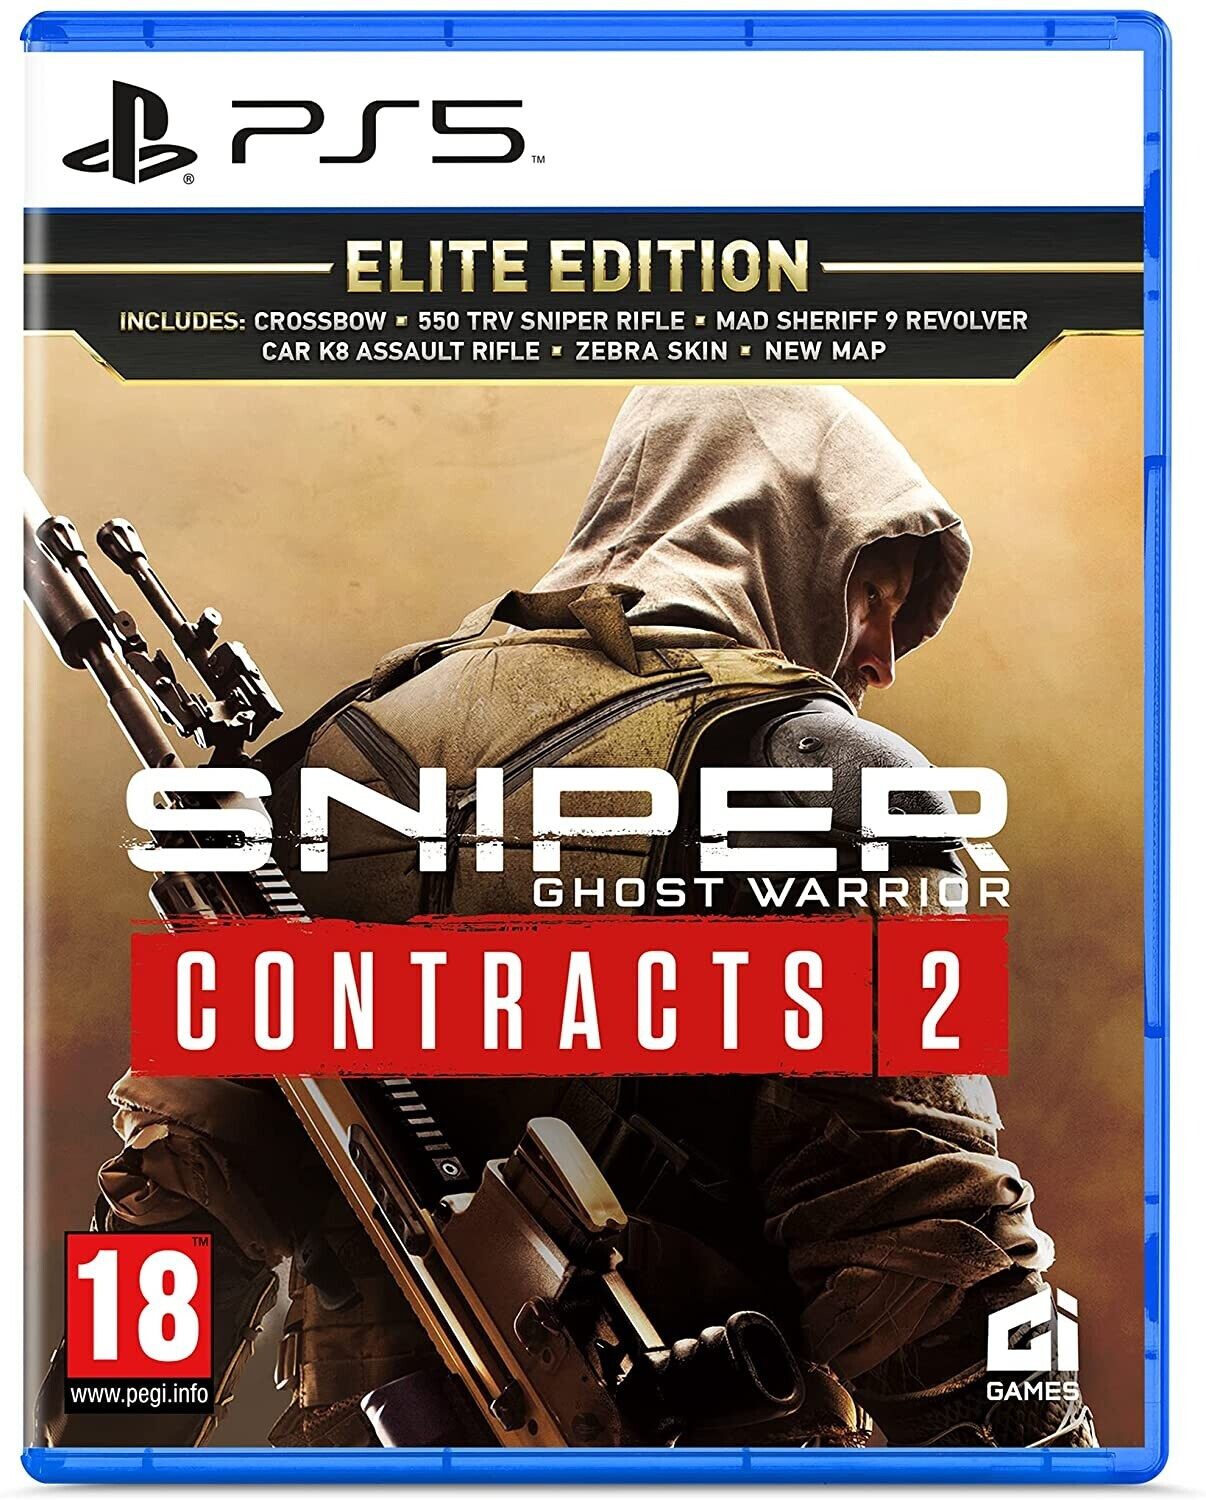 Photos - Game Koch Media Sniper: Ghost Warrior - Contracts 2 - Elite Edition (PS5)